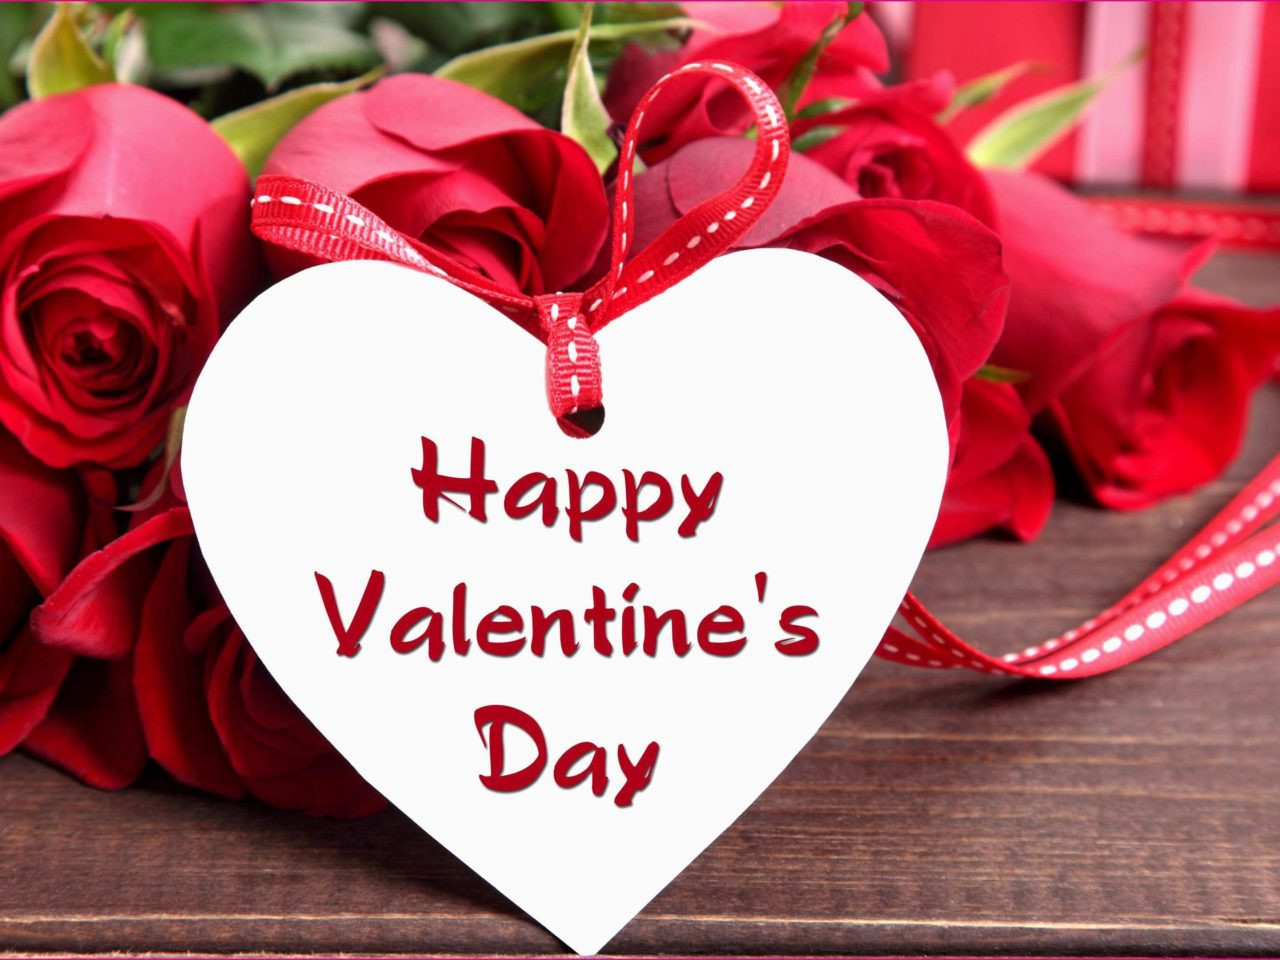 Valentines Day Pic and Quotes Best Of Happy Valentines Day Wishes Quotes Messages Love Hd